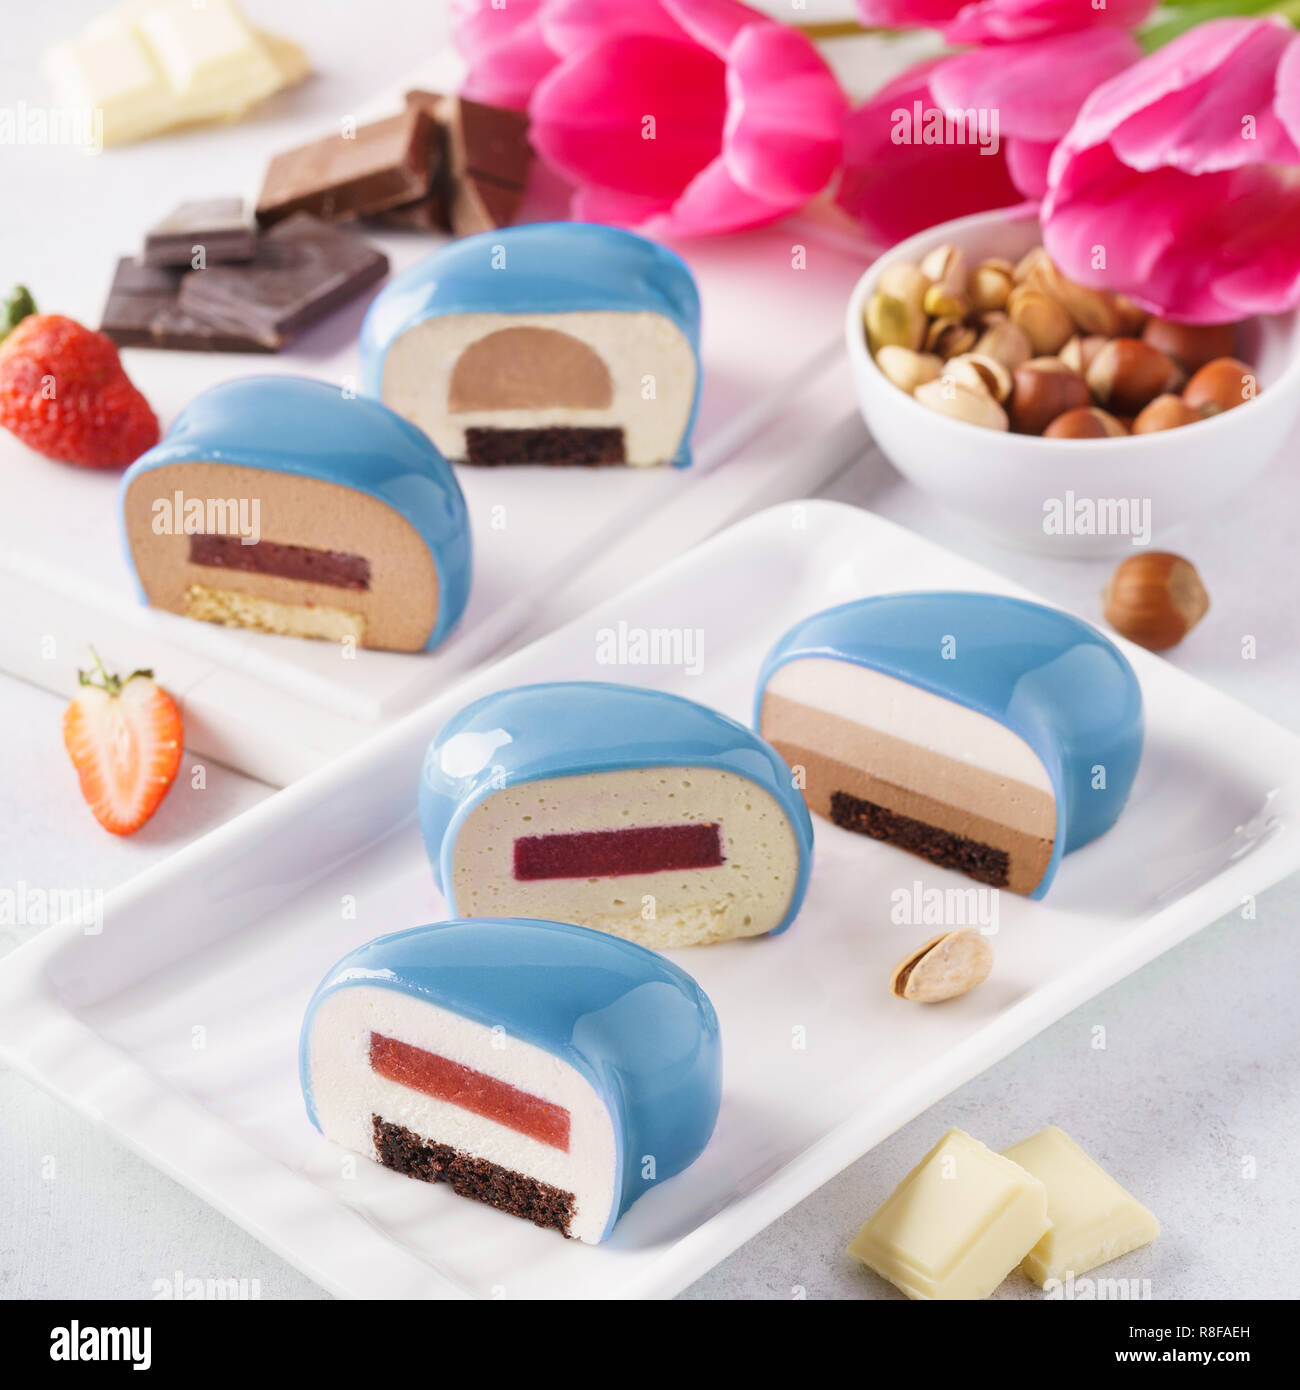 Set of blue heart shaped mousse cakes with various fillings. Stock Photo